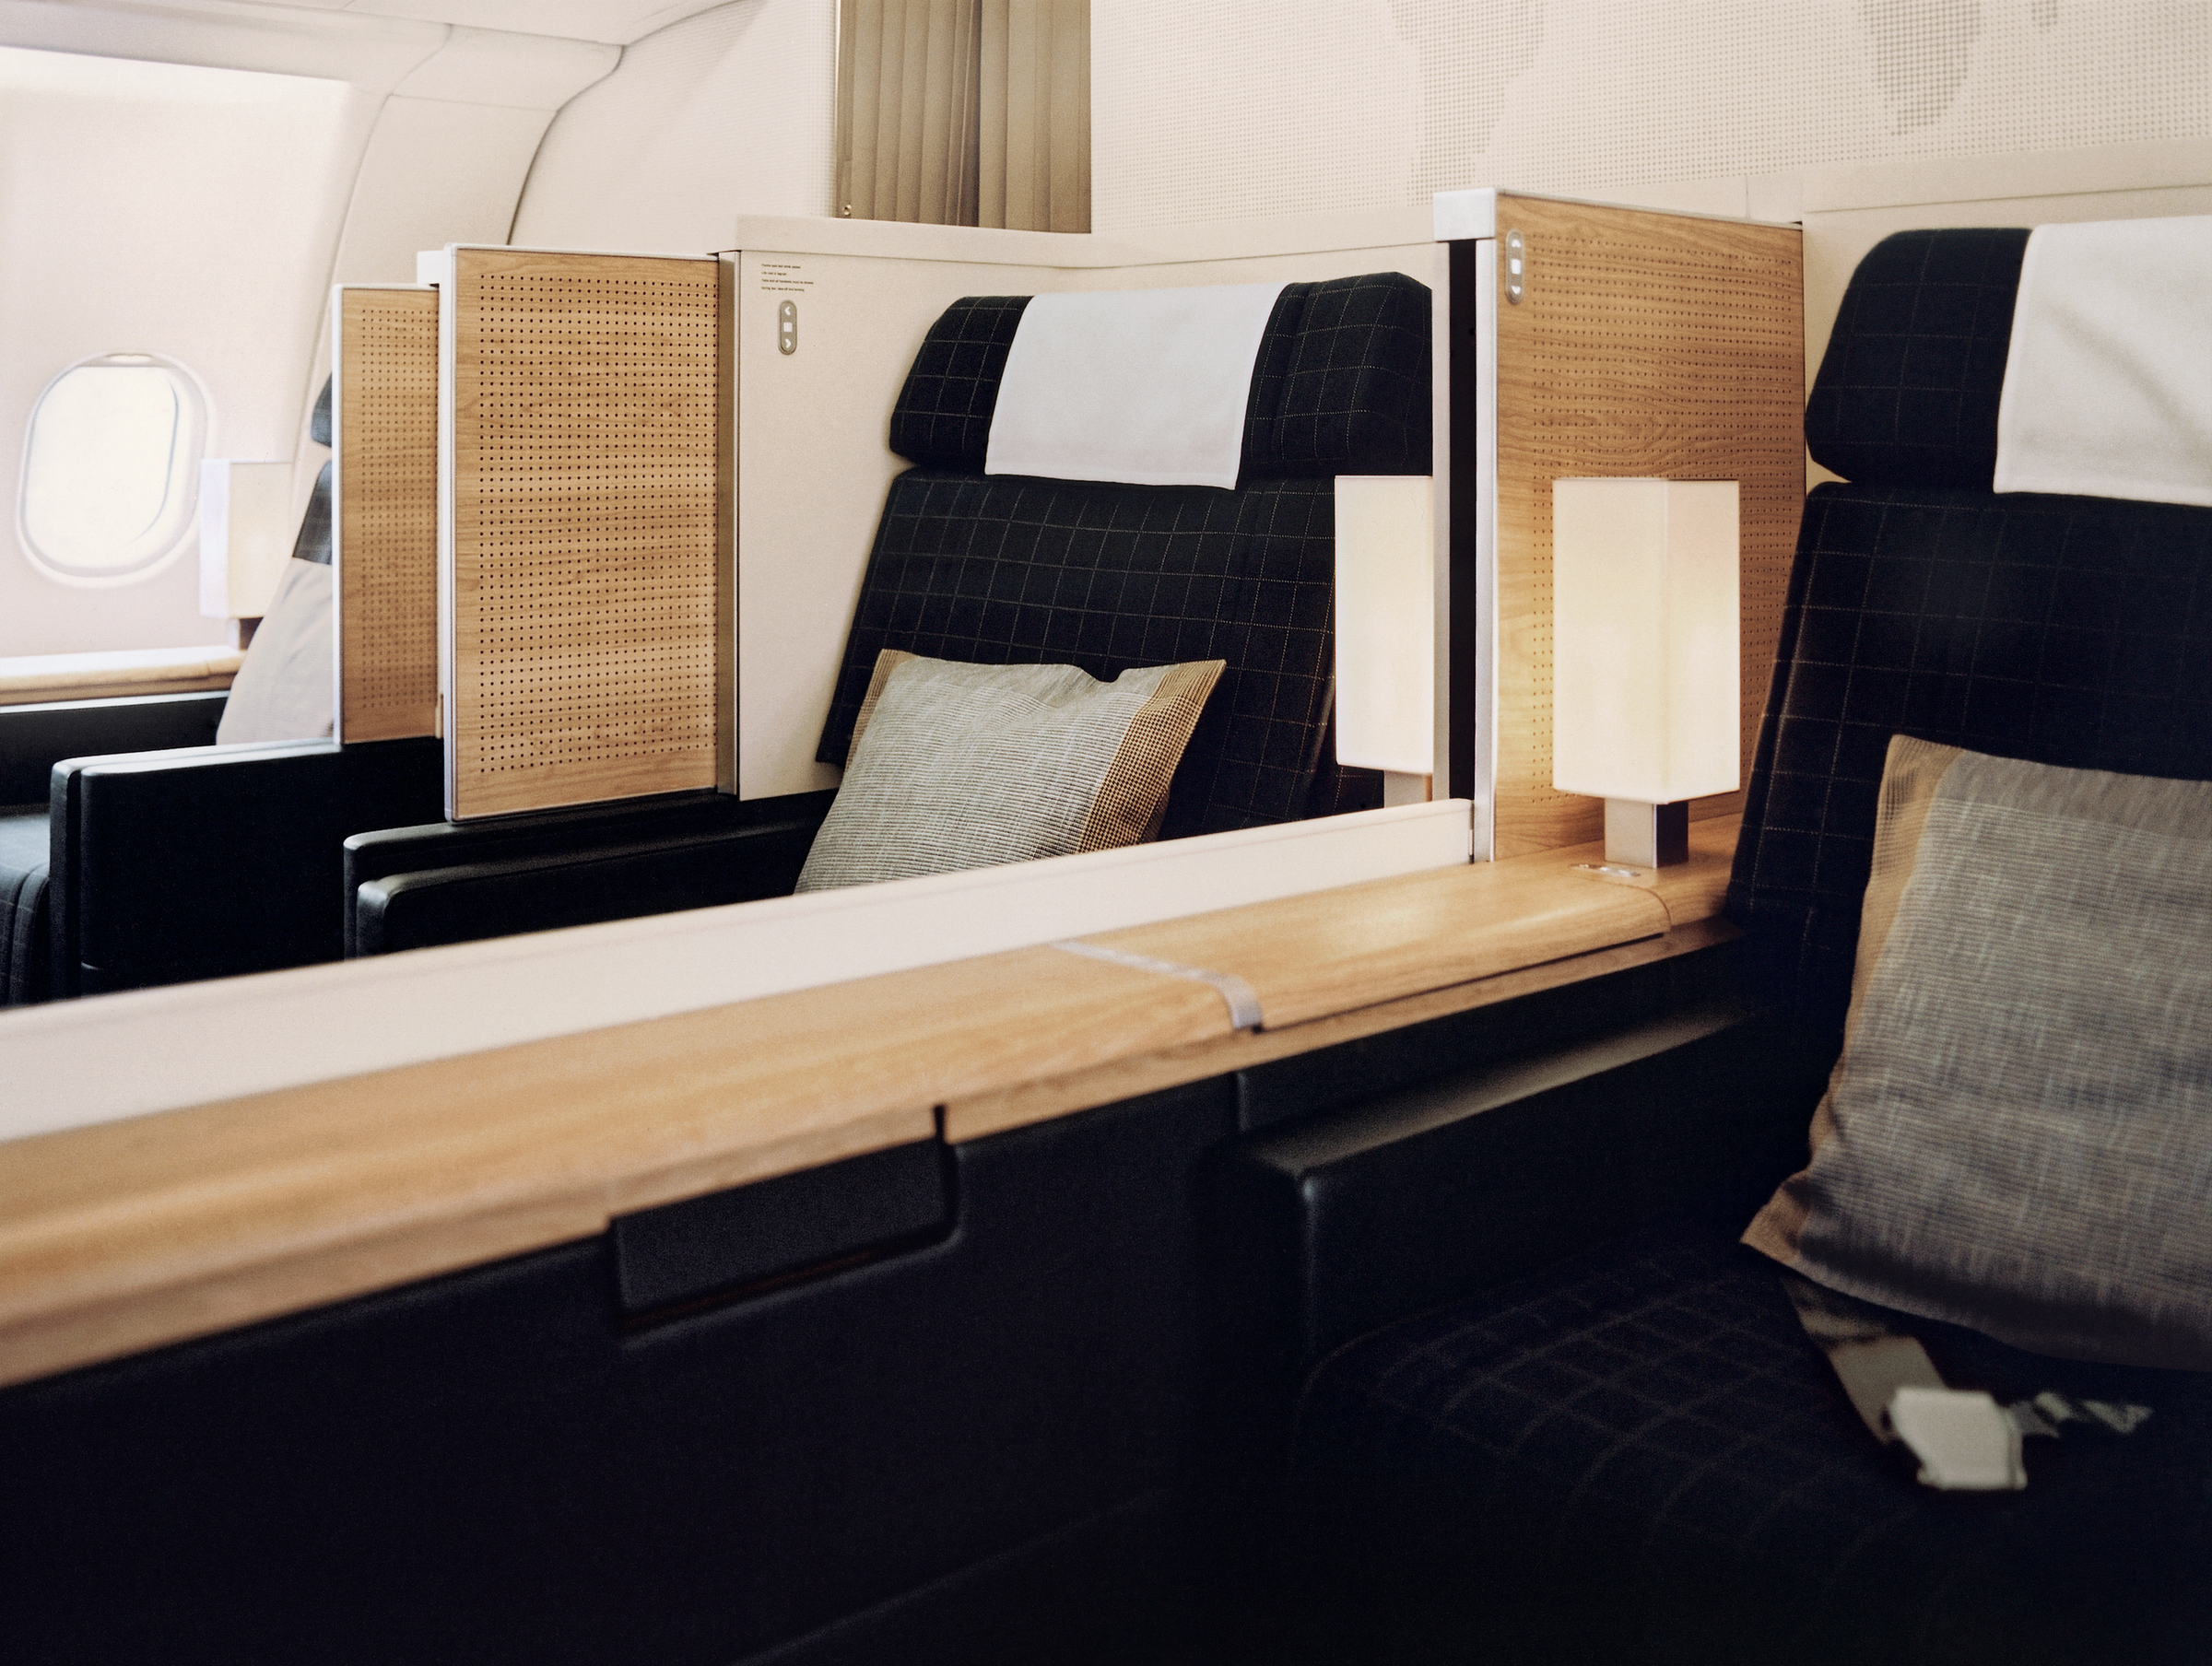 Two SWISS first class seats on the Airbus A330.